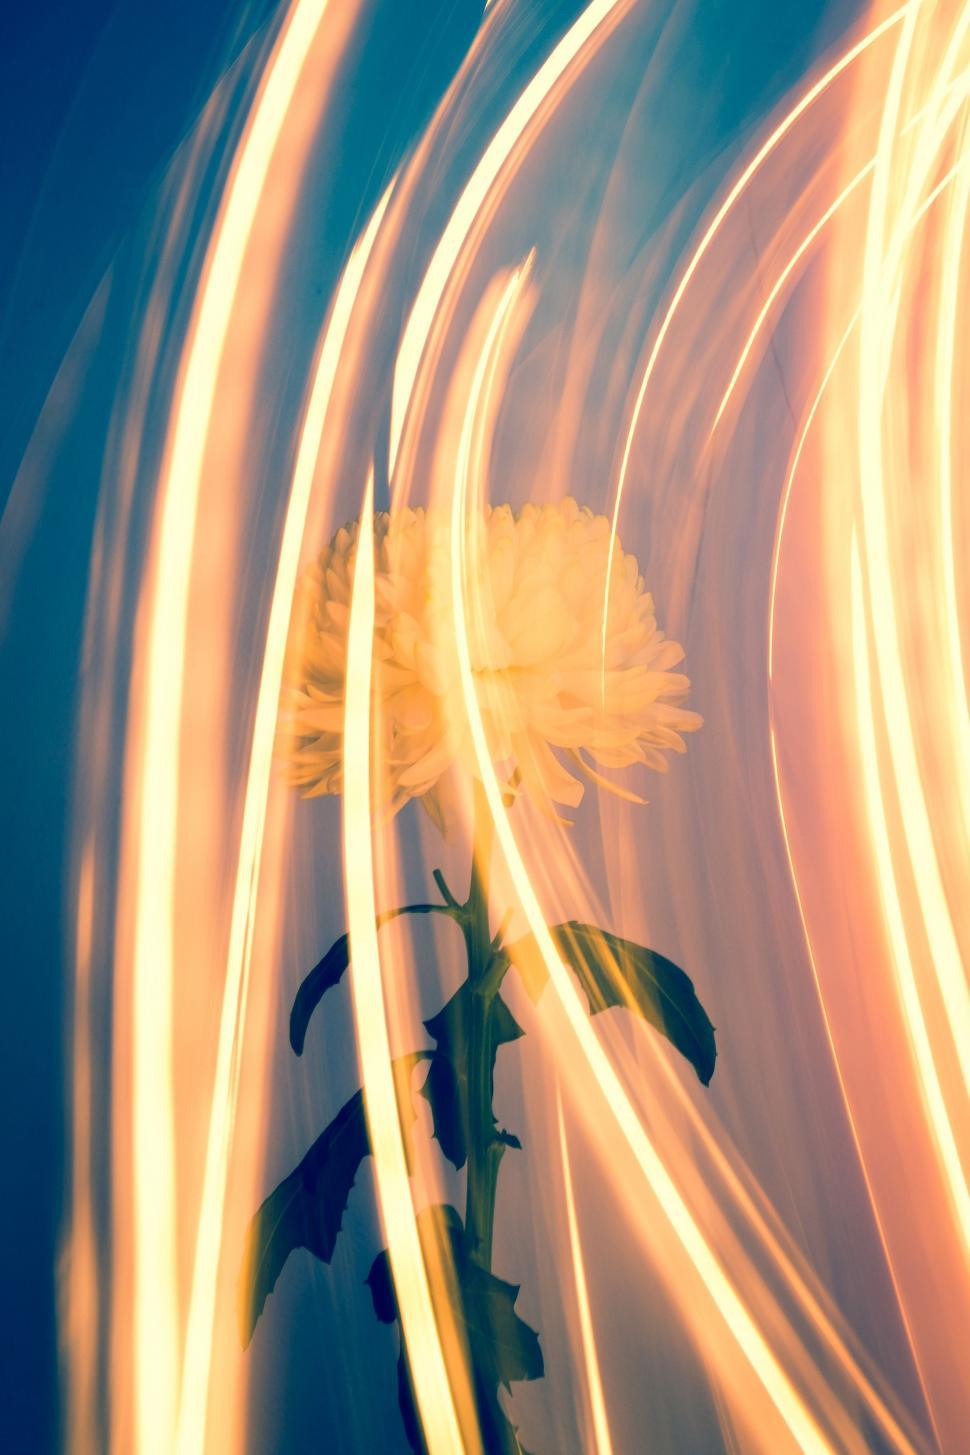 Free Image of Blurry Flower in Blurry Background 